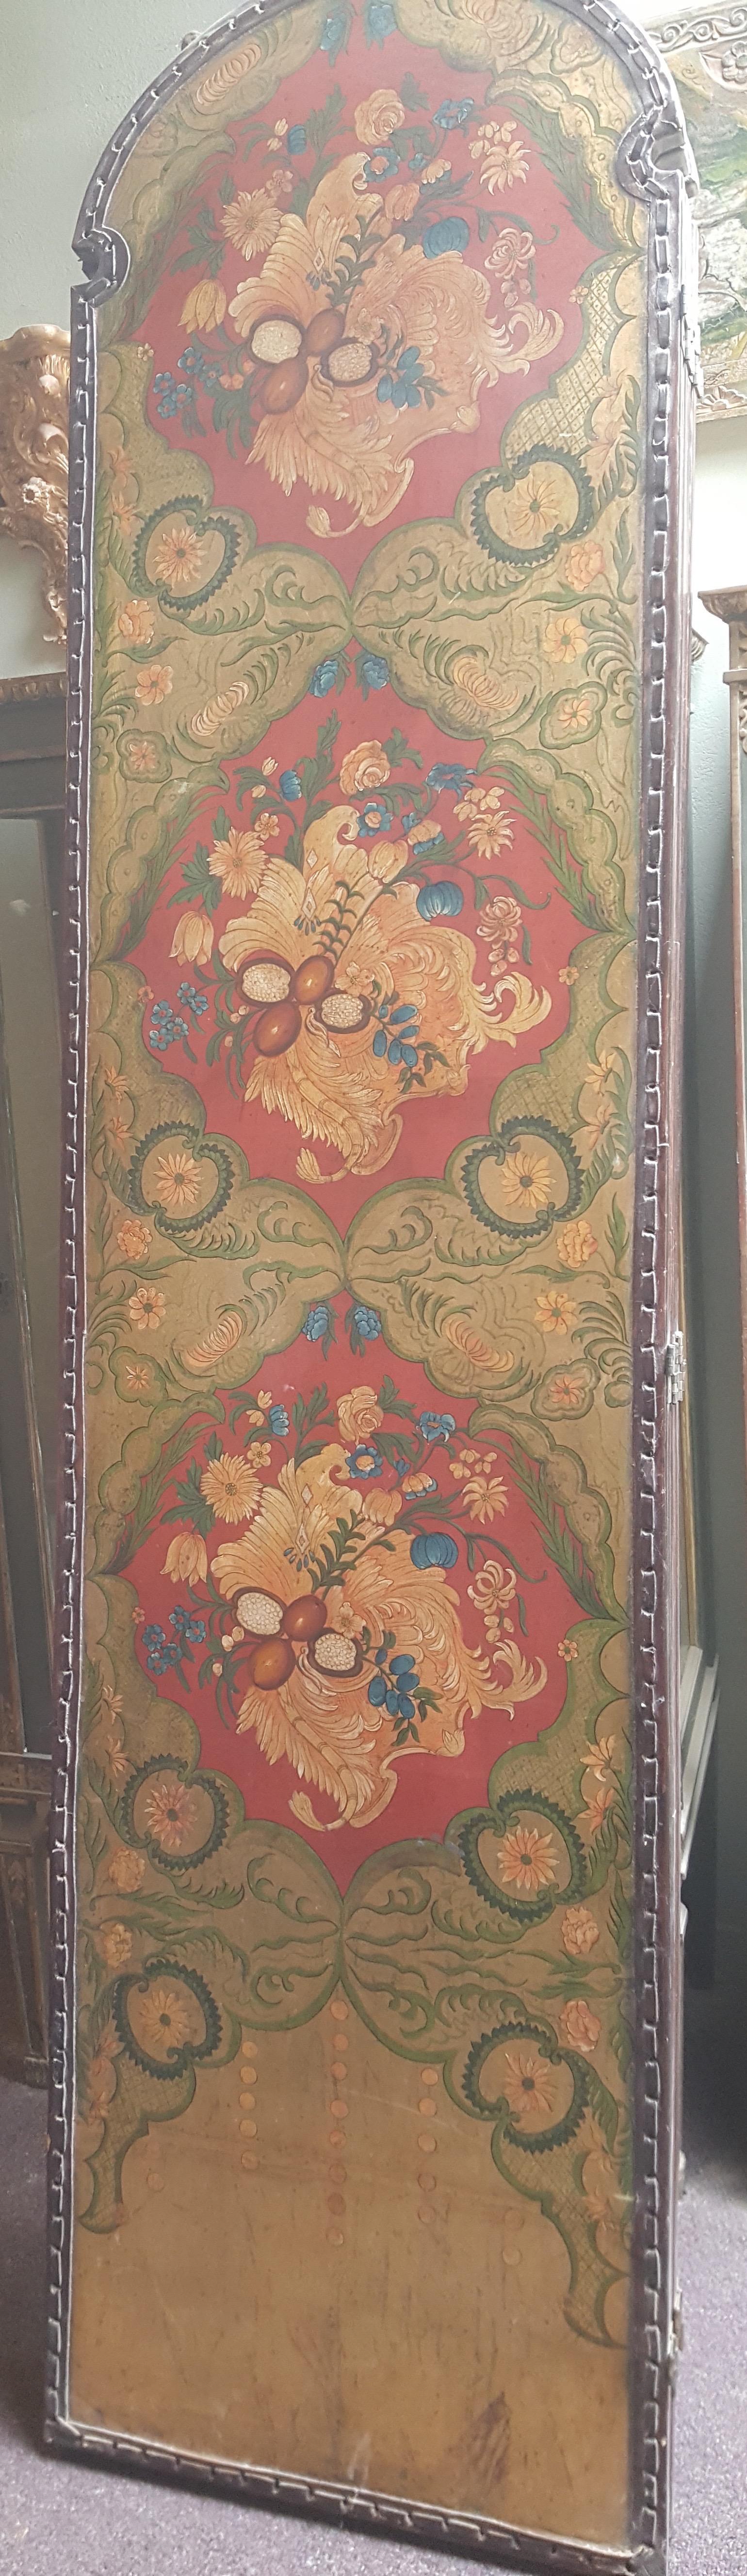 4 panel screen with gilded floral scene on leather. Back panel is also leather wrapped with woven leather detail at edge.